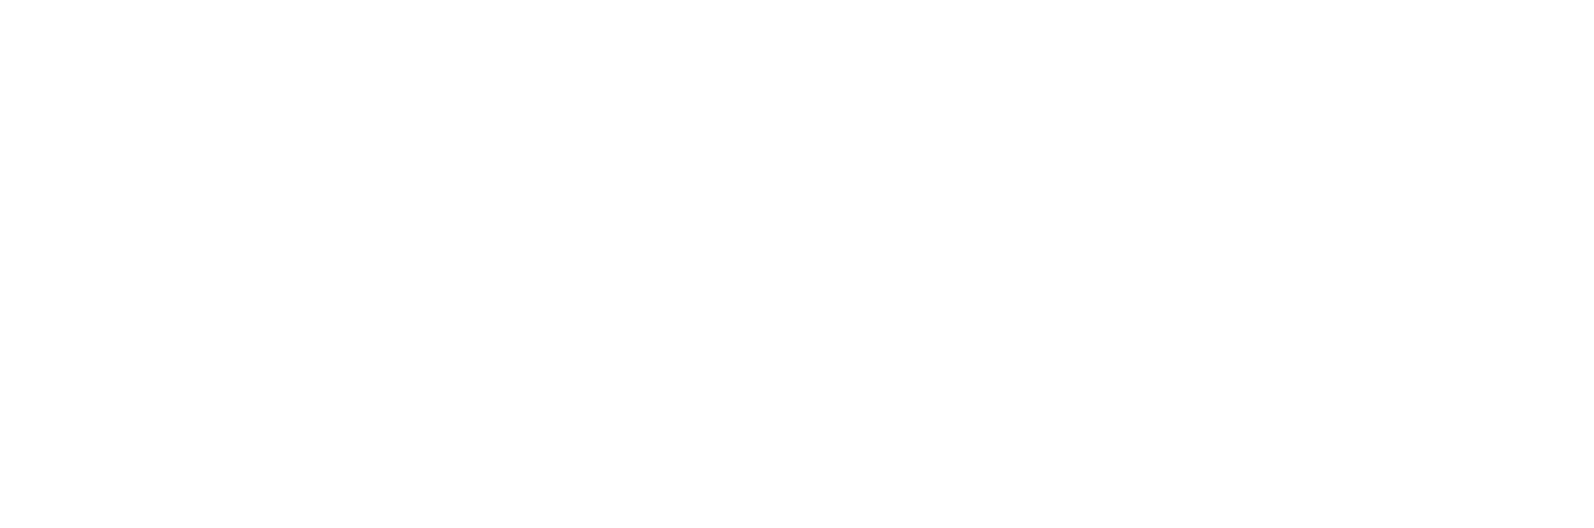 NuScale Power logo large for dark backgrounds (transparent PNG)